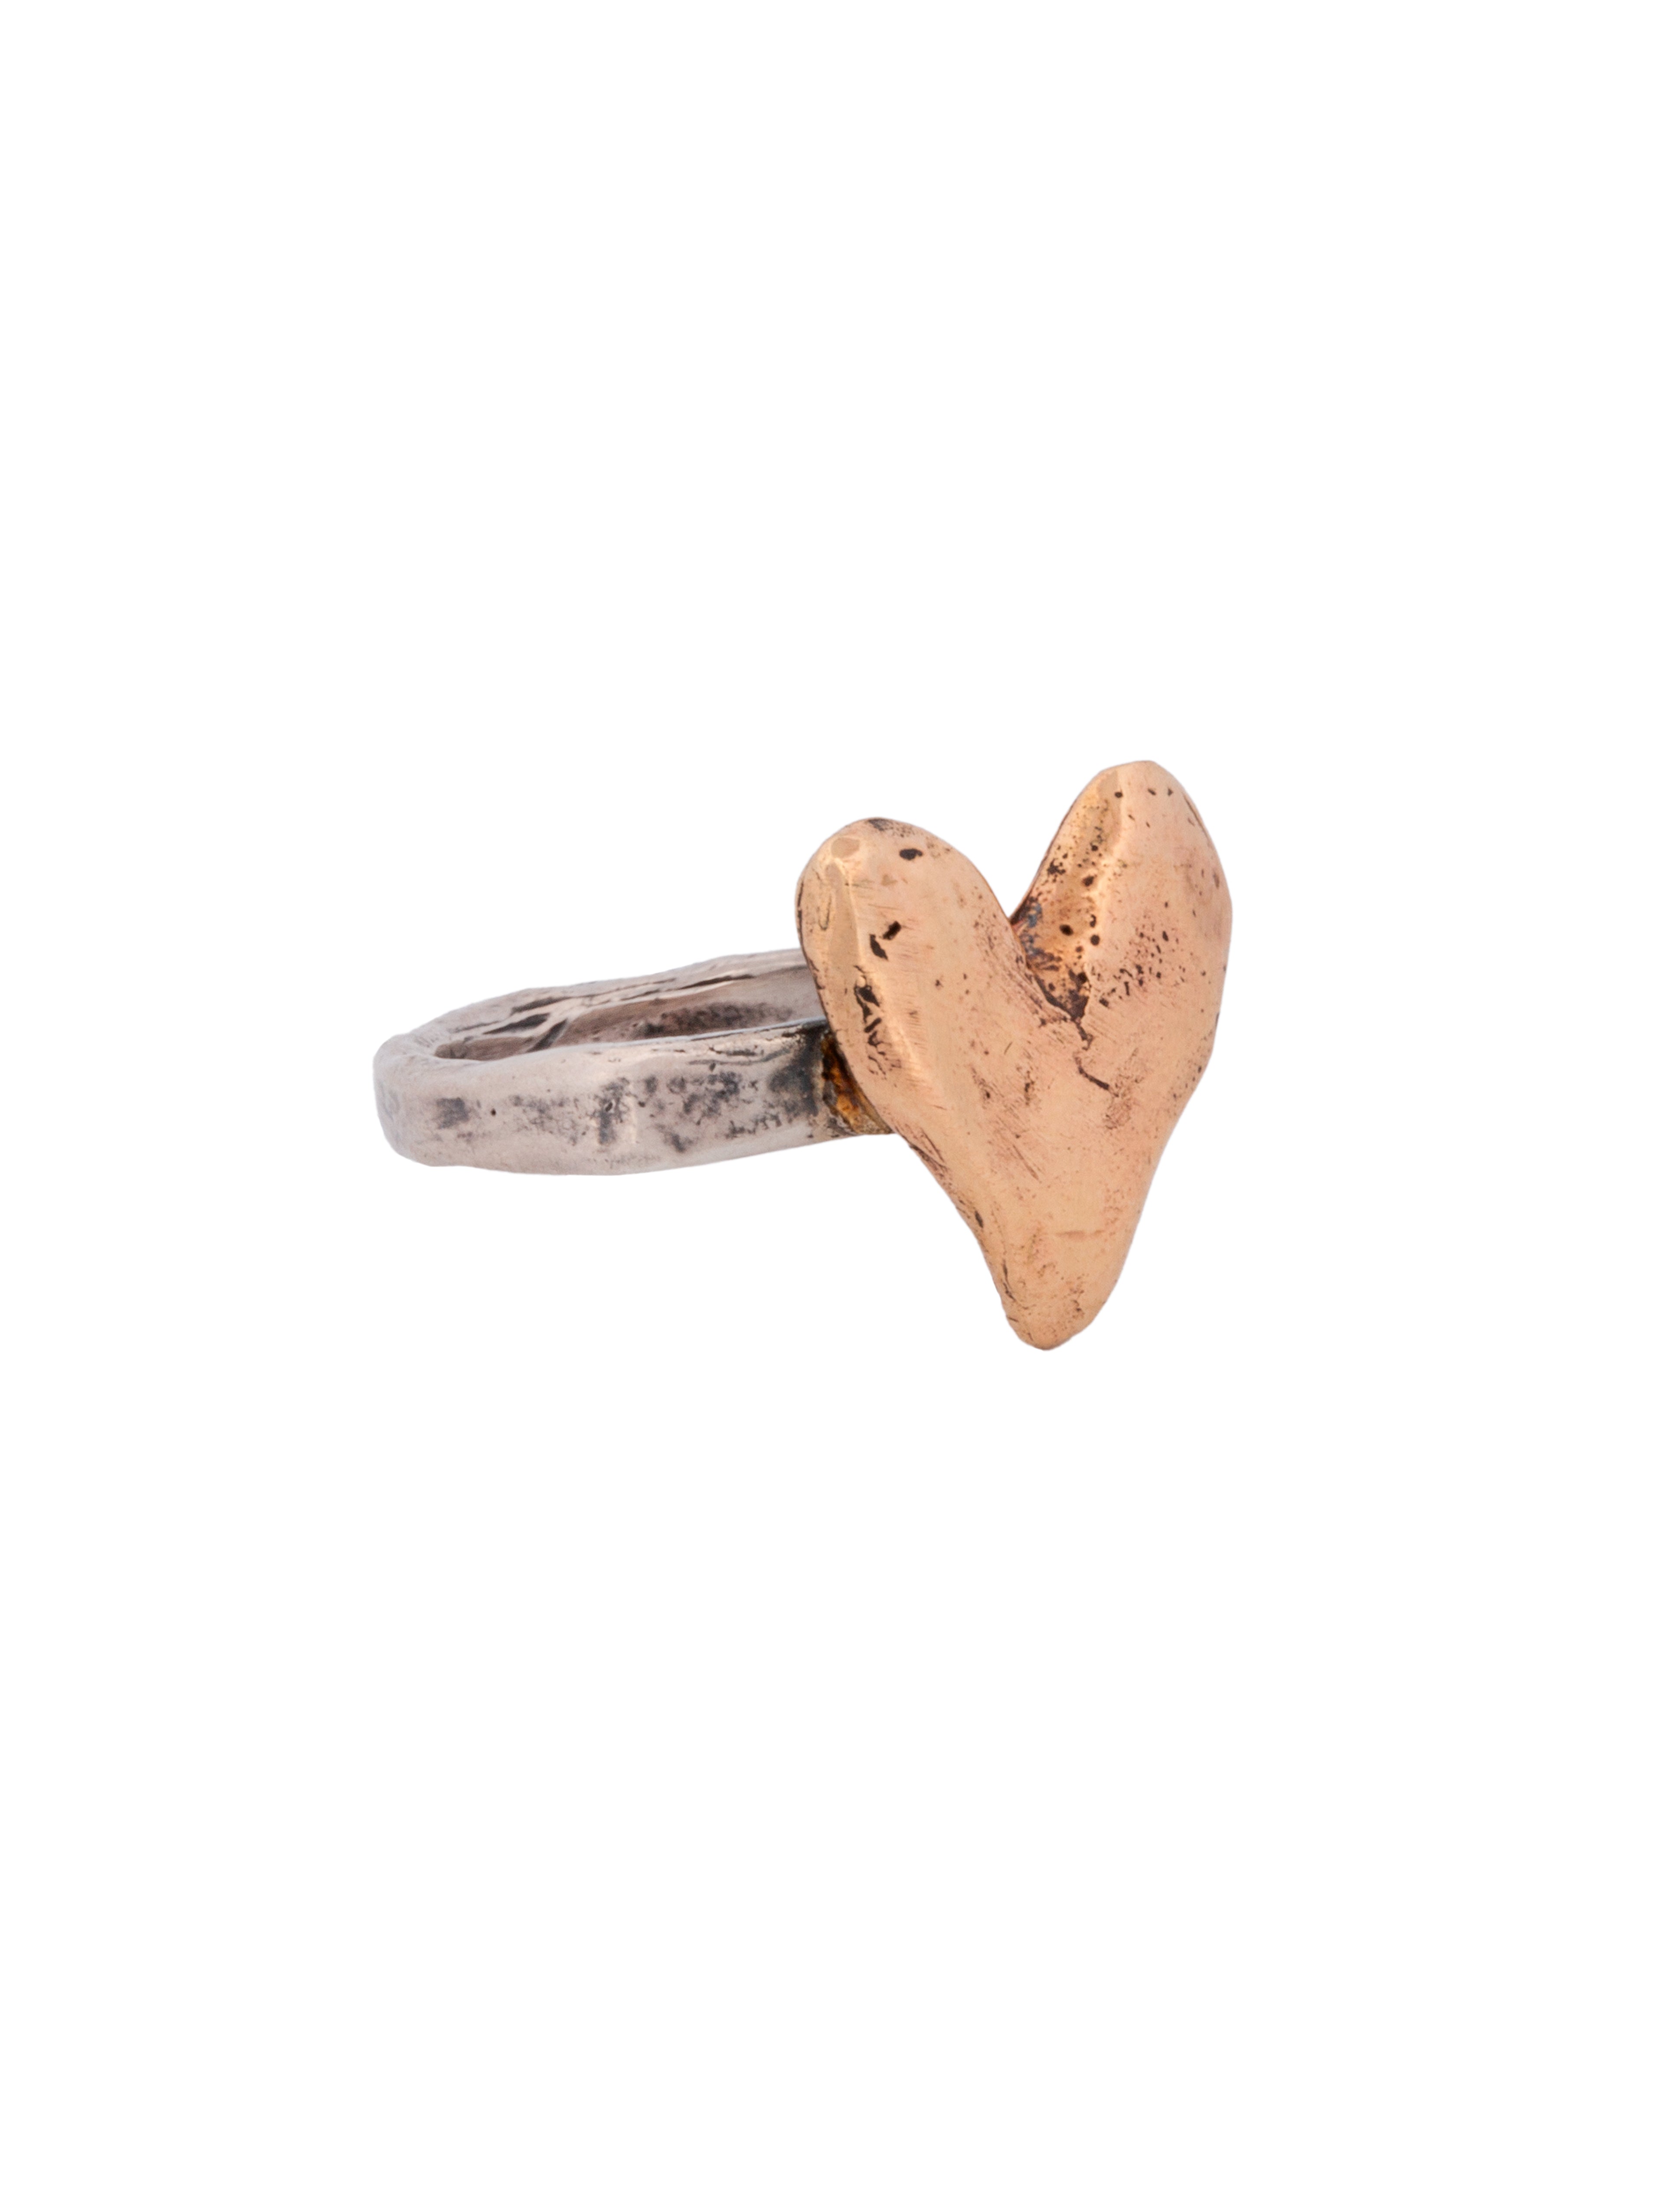 Sacred Heart of Gold Ring